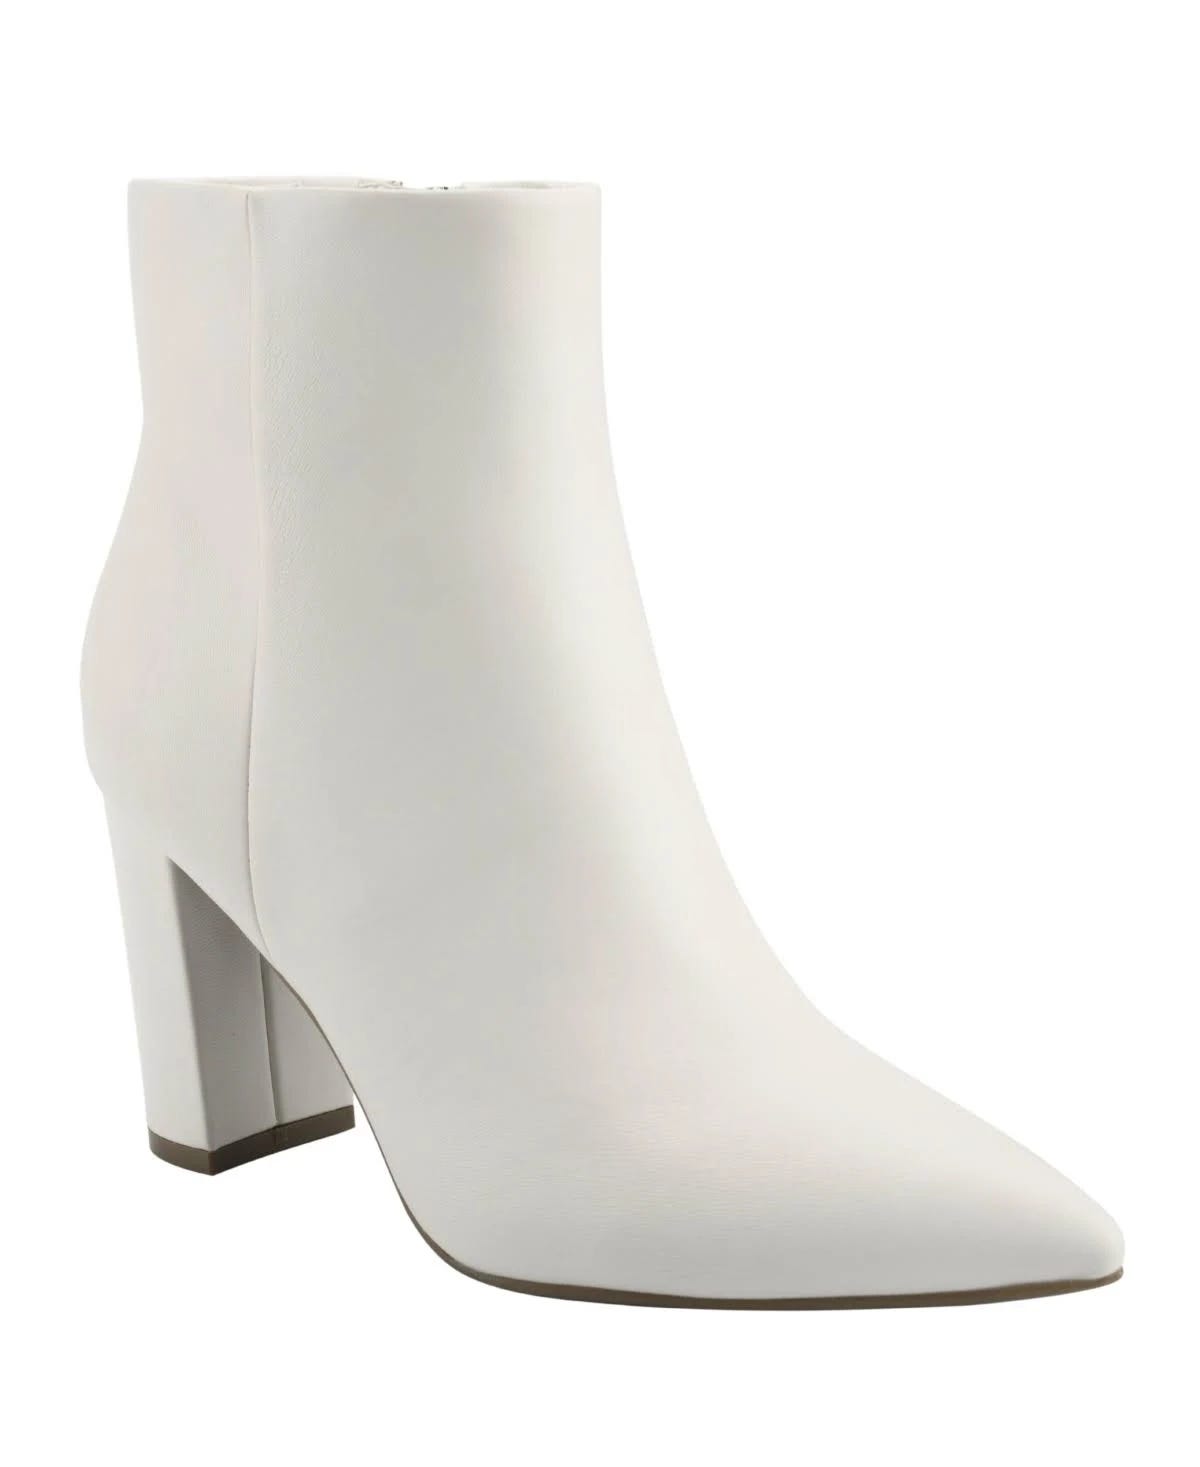 White Pointy Toe Booties with Block Heel | Image